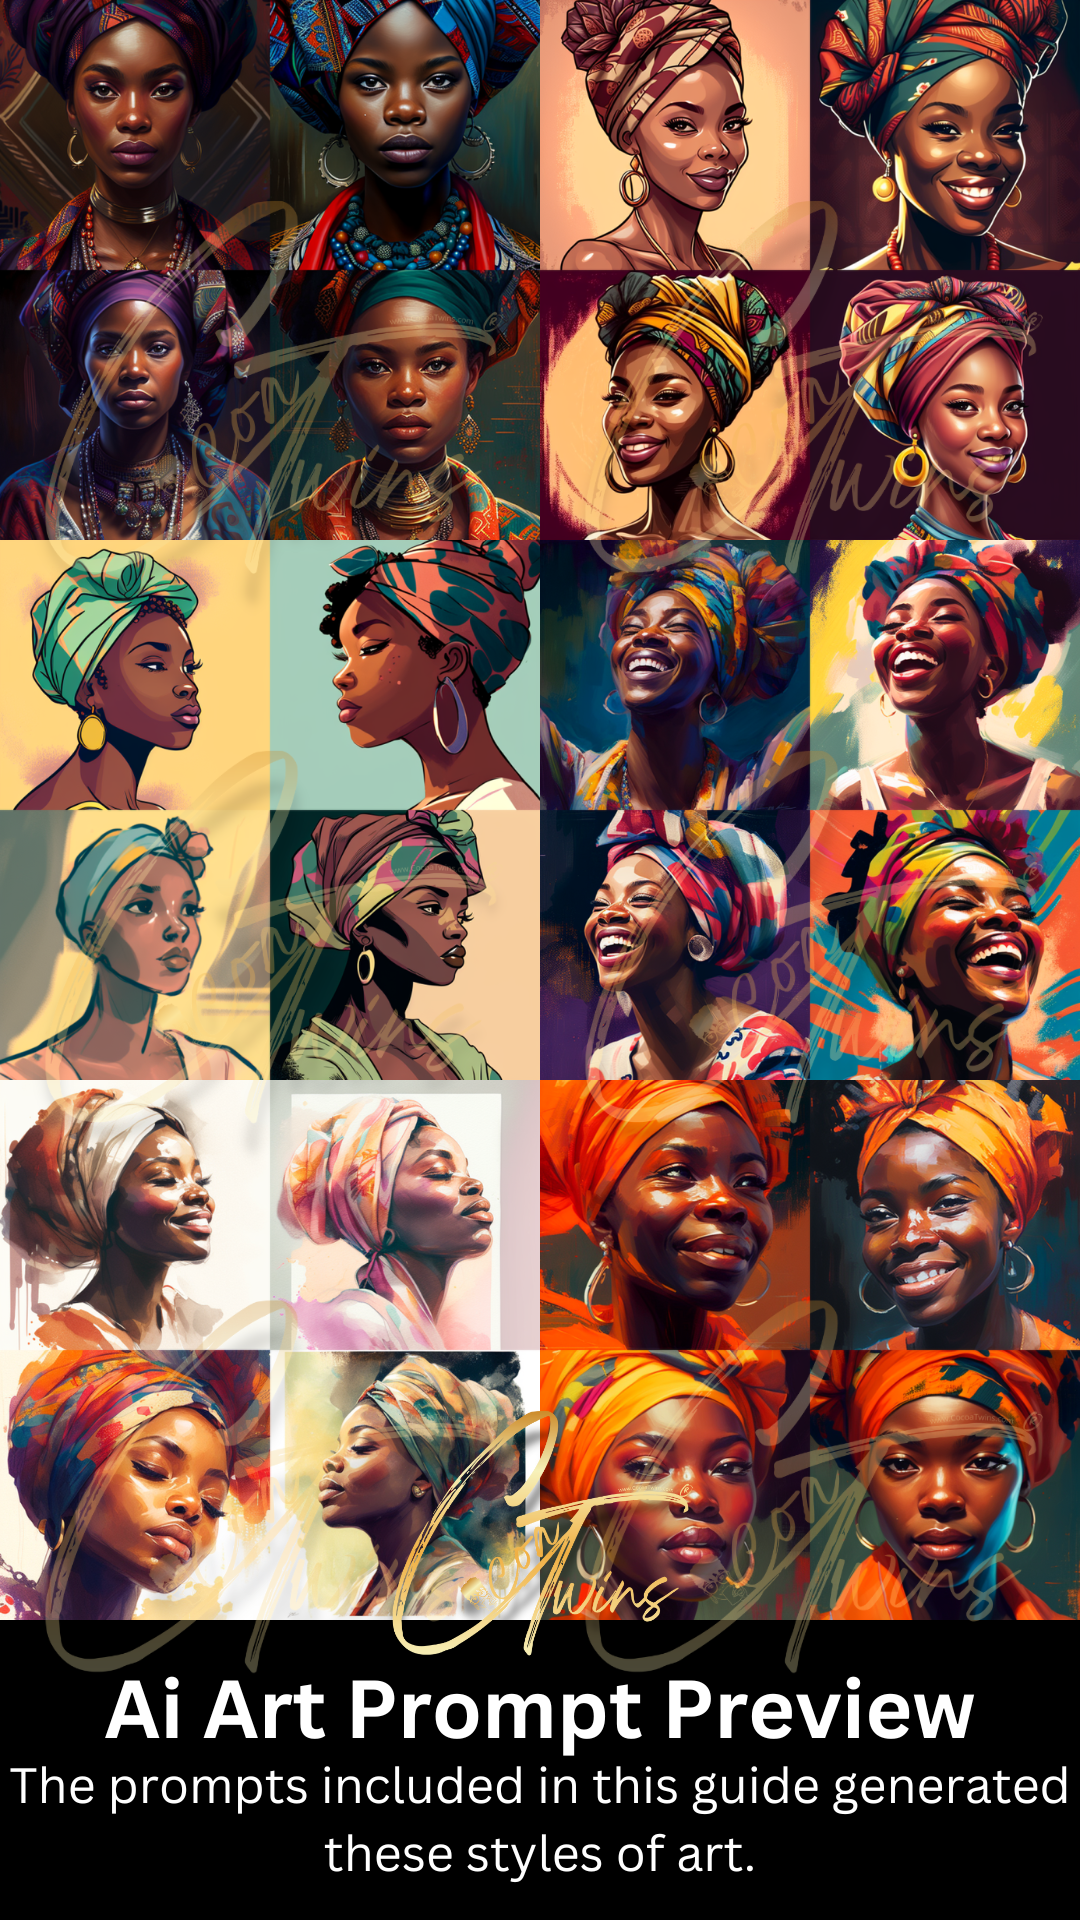 Ai Prompt Guide Subject Matter: Crowned (Headwraps)